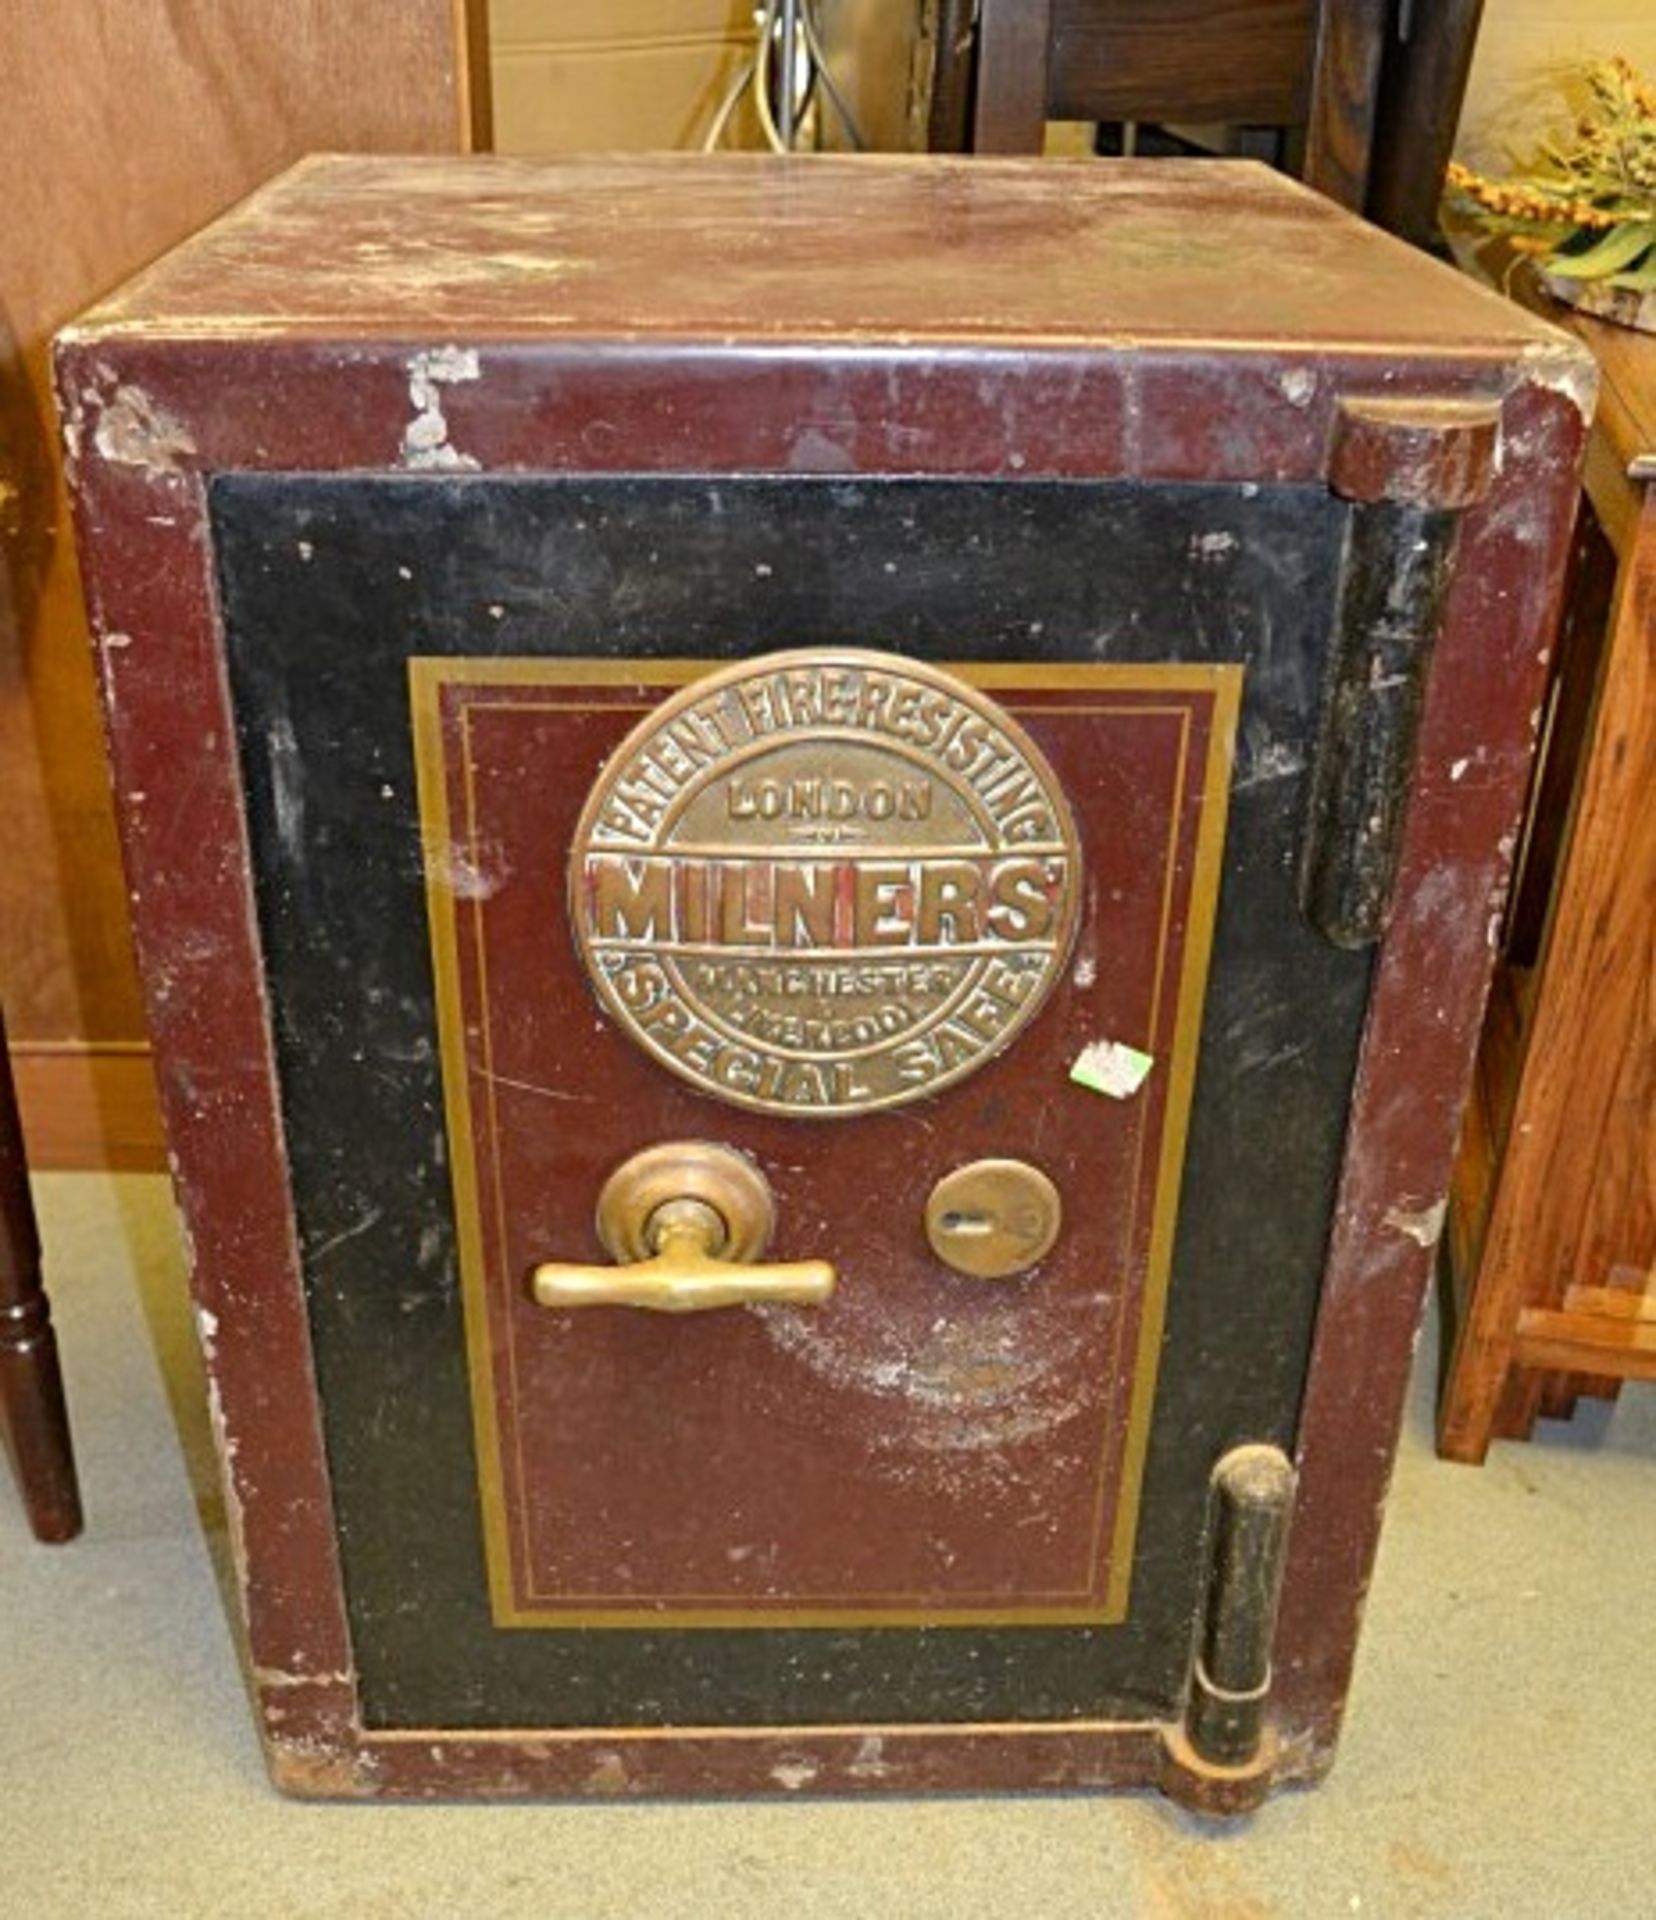 1 x Vintage Milners "Special" Fire Resistant Safe - Circa 1920-1950 - From A Grade II Listed Hall In